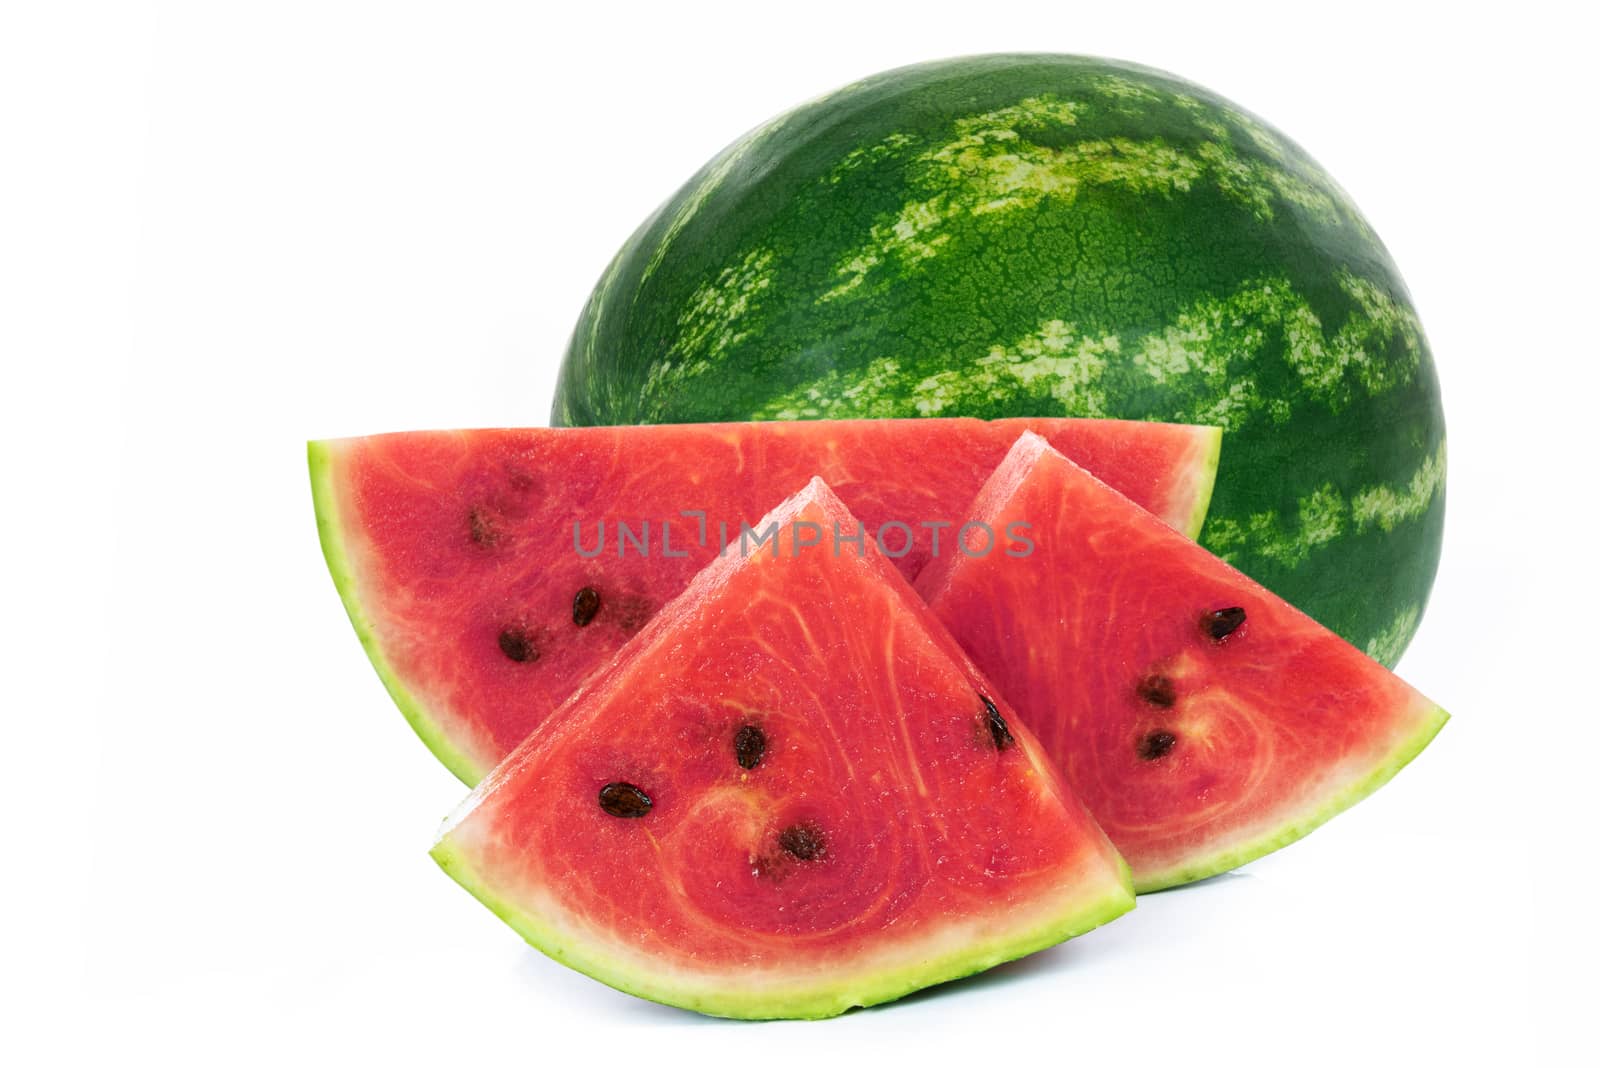 Slices and whole part of a fresh and ripe watermelon isolated on a white background in close-up.